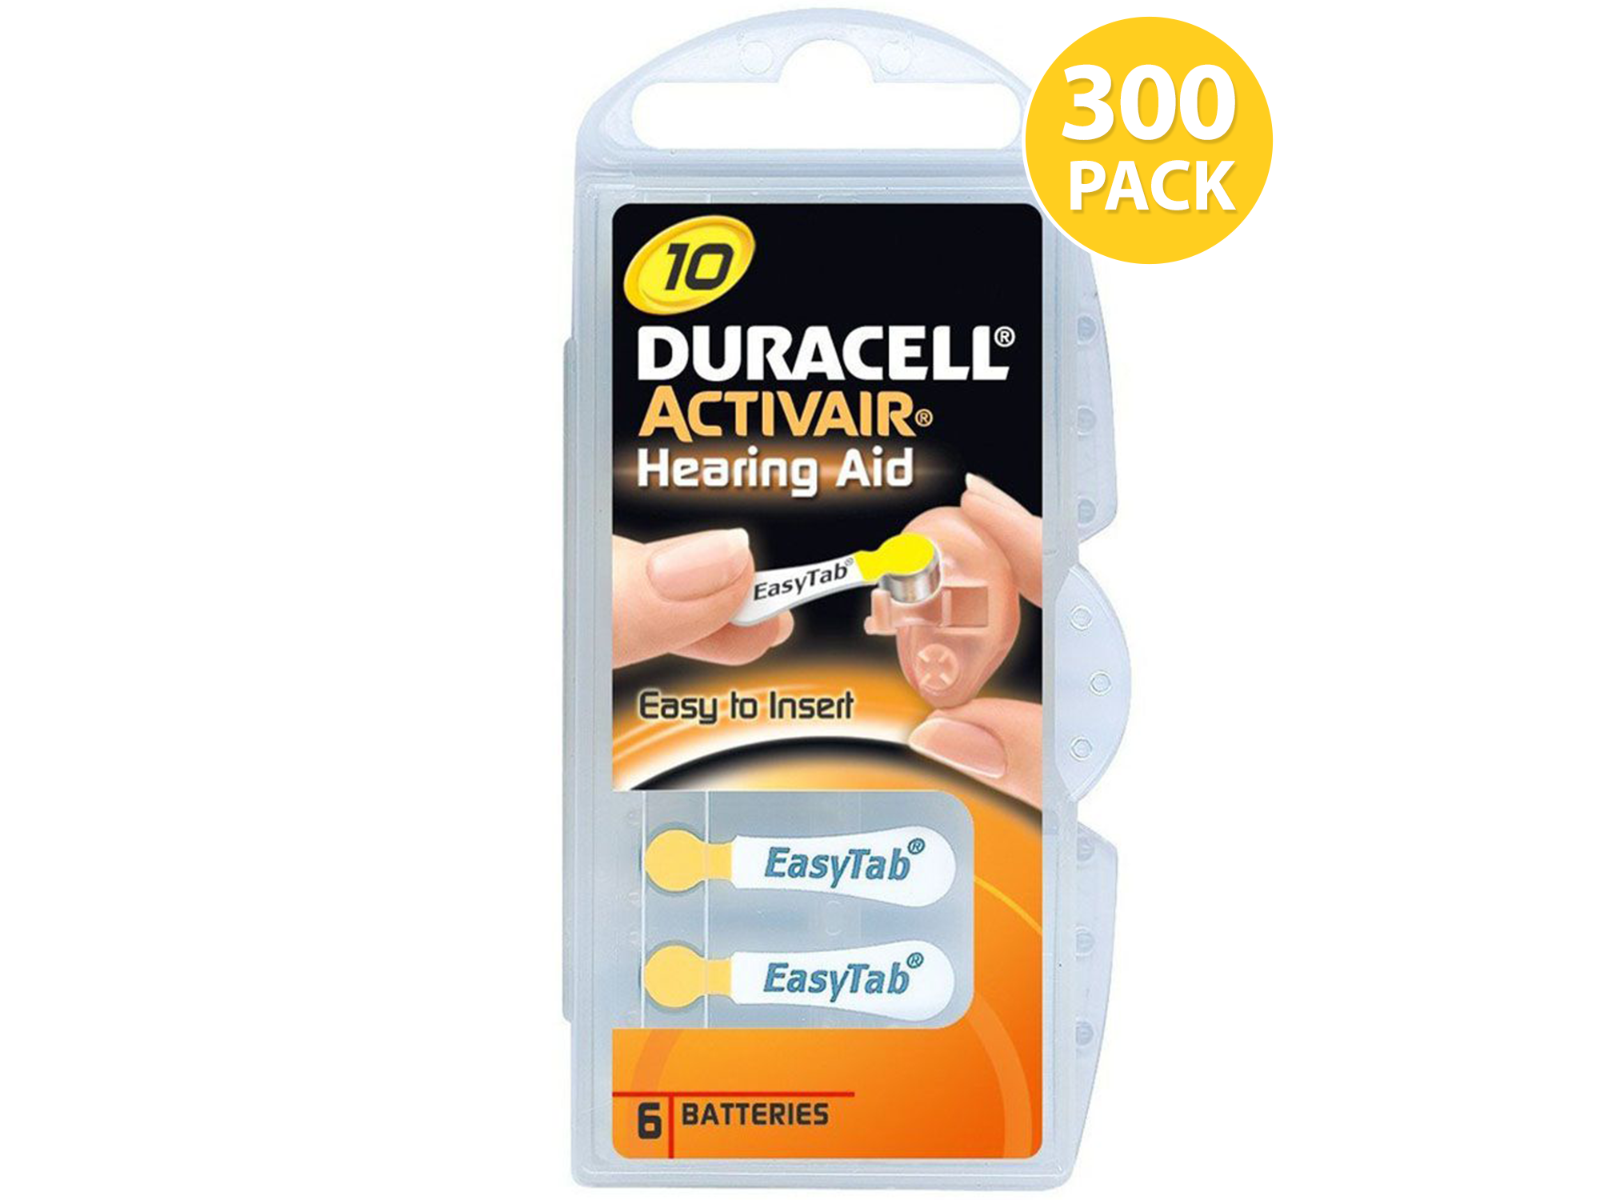 Duracell Hearing Aid Battery Size 10 (300 Pcs)